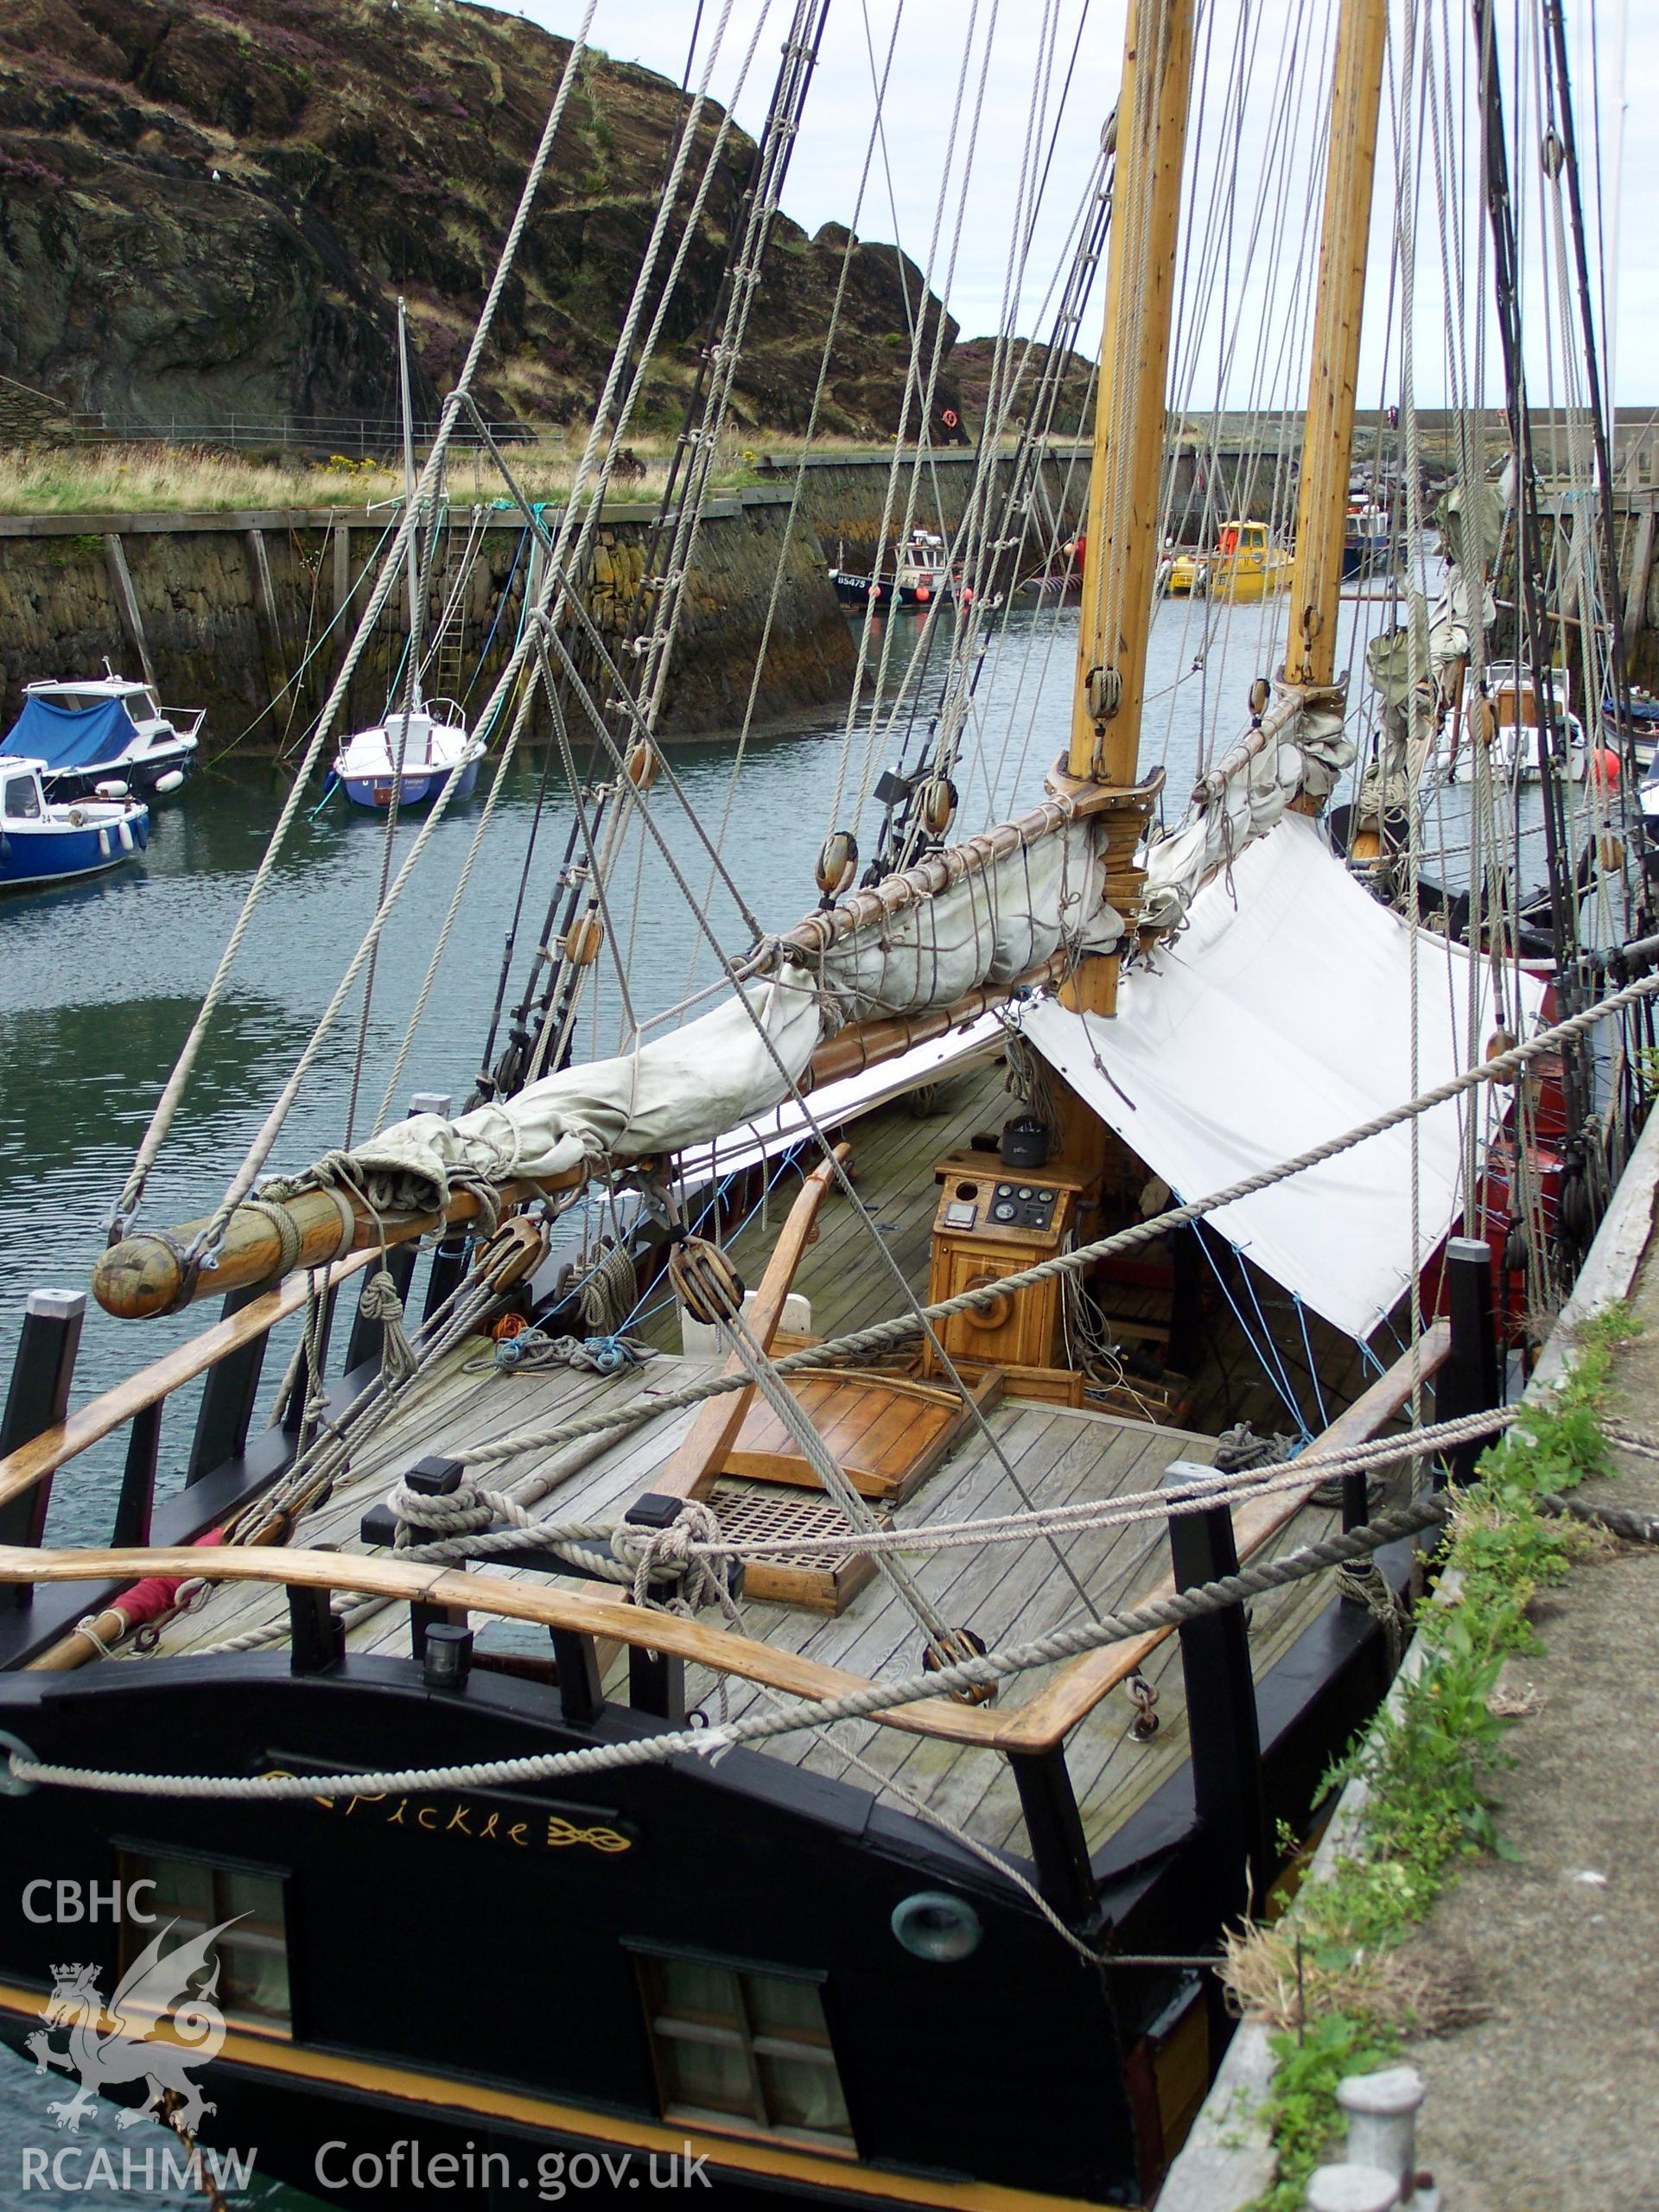 Aft deck and tiller of HMS PICKLE replica built to undertake a sea voyage around the UK to celebrate the  bicentenary of the Battle of Trafalgar.